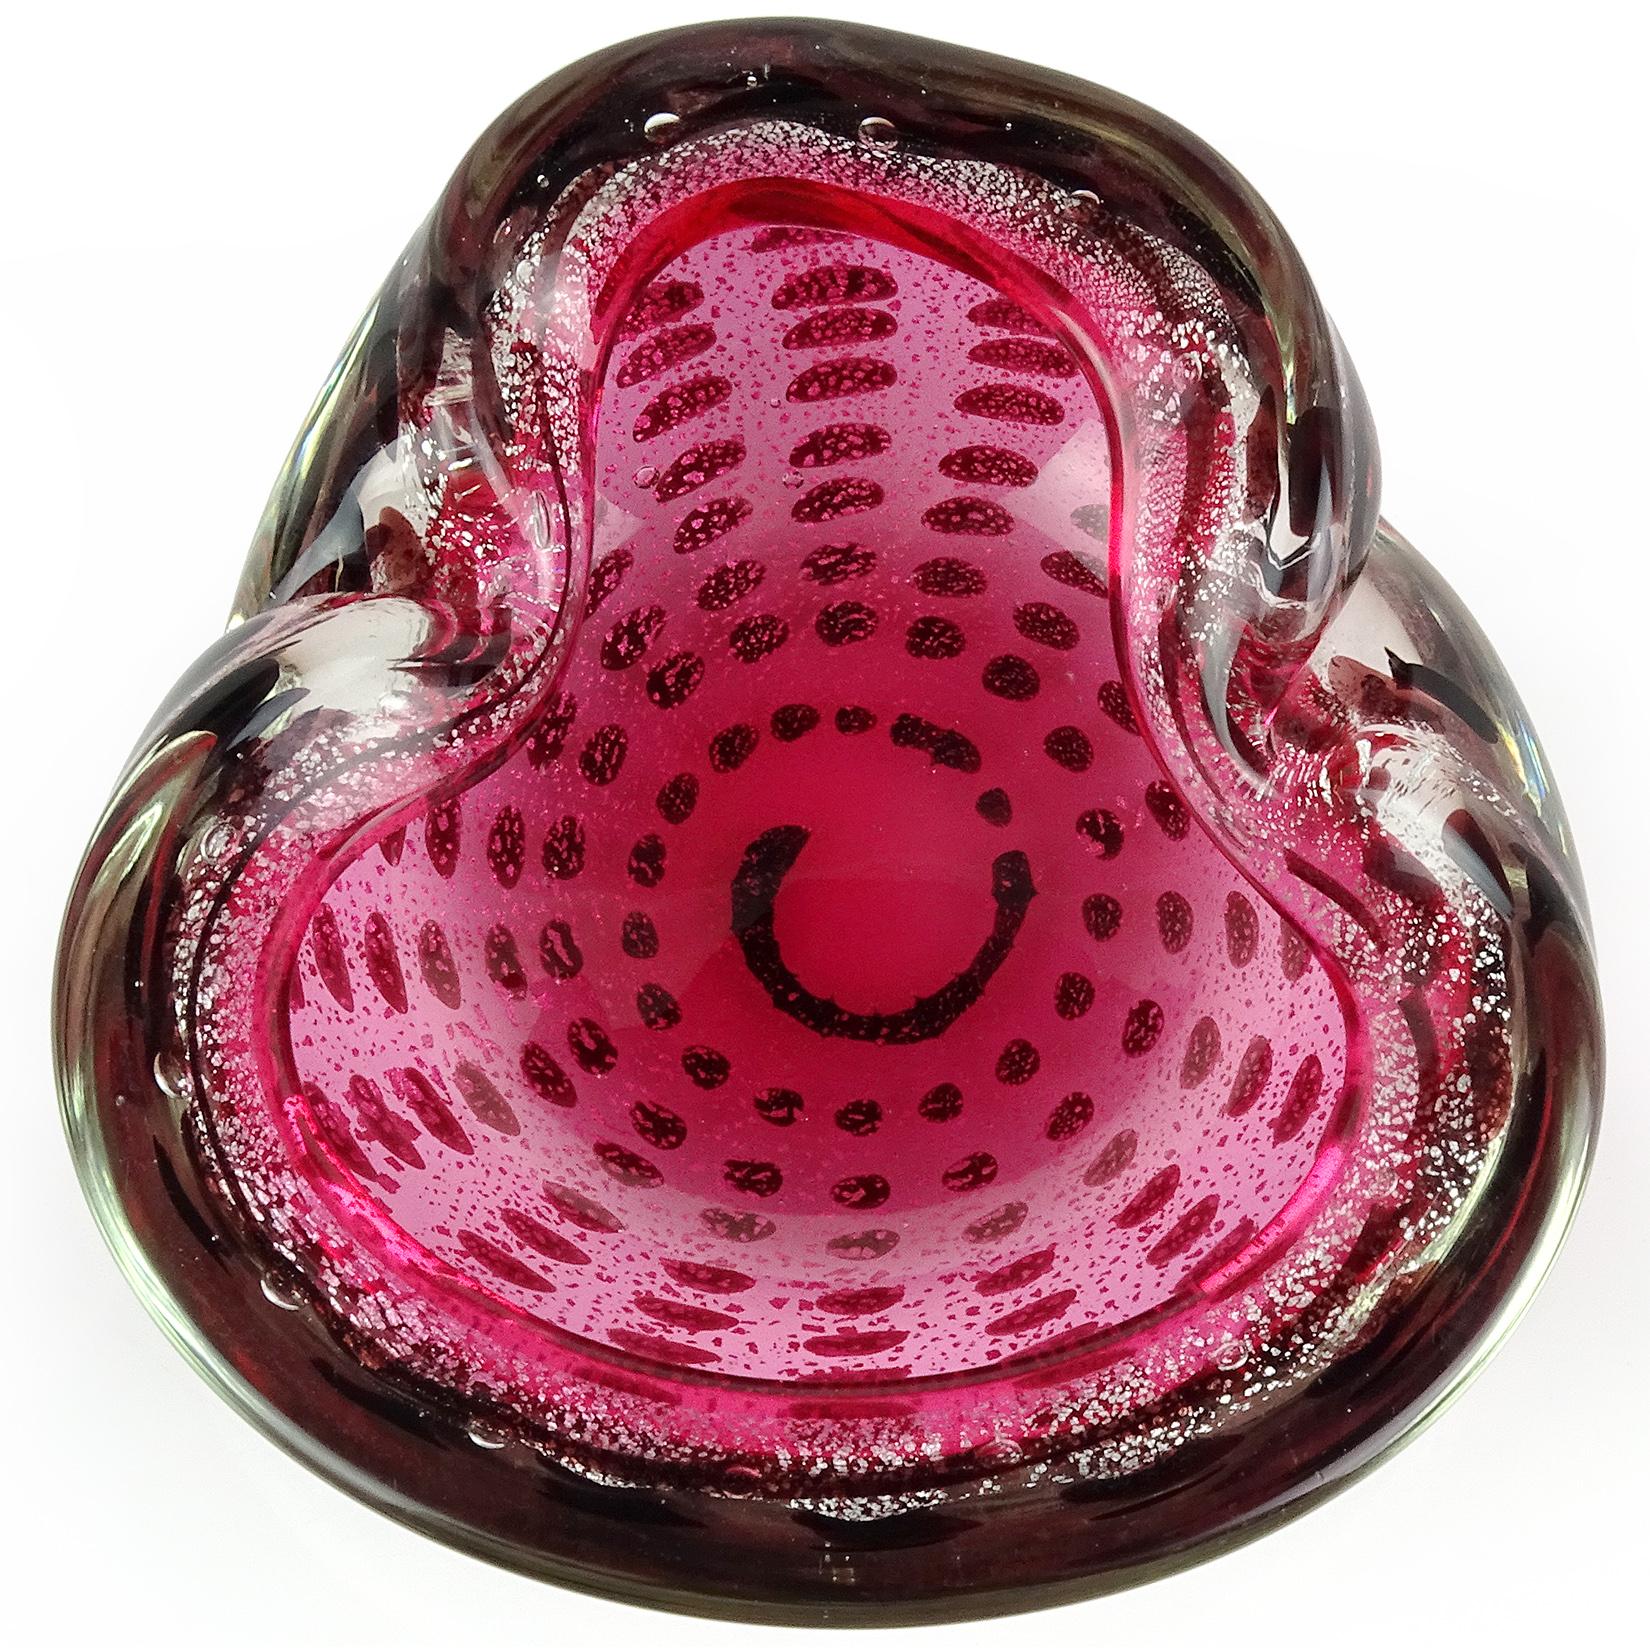 Beautiful vintage Murano hand blown, rich pink with dark spots Italian art glass decorative bowl. The piece has a folded over edge, with decorative indents. It is profusely covered in silver leaf, with rows of dark purple (almost black) spots